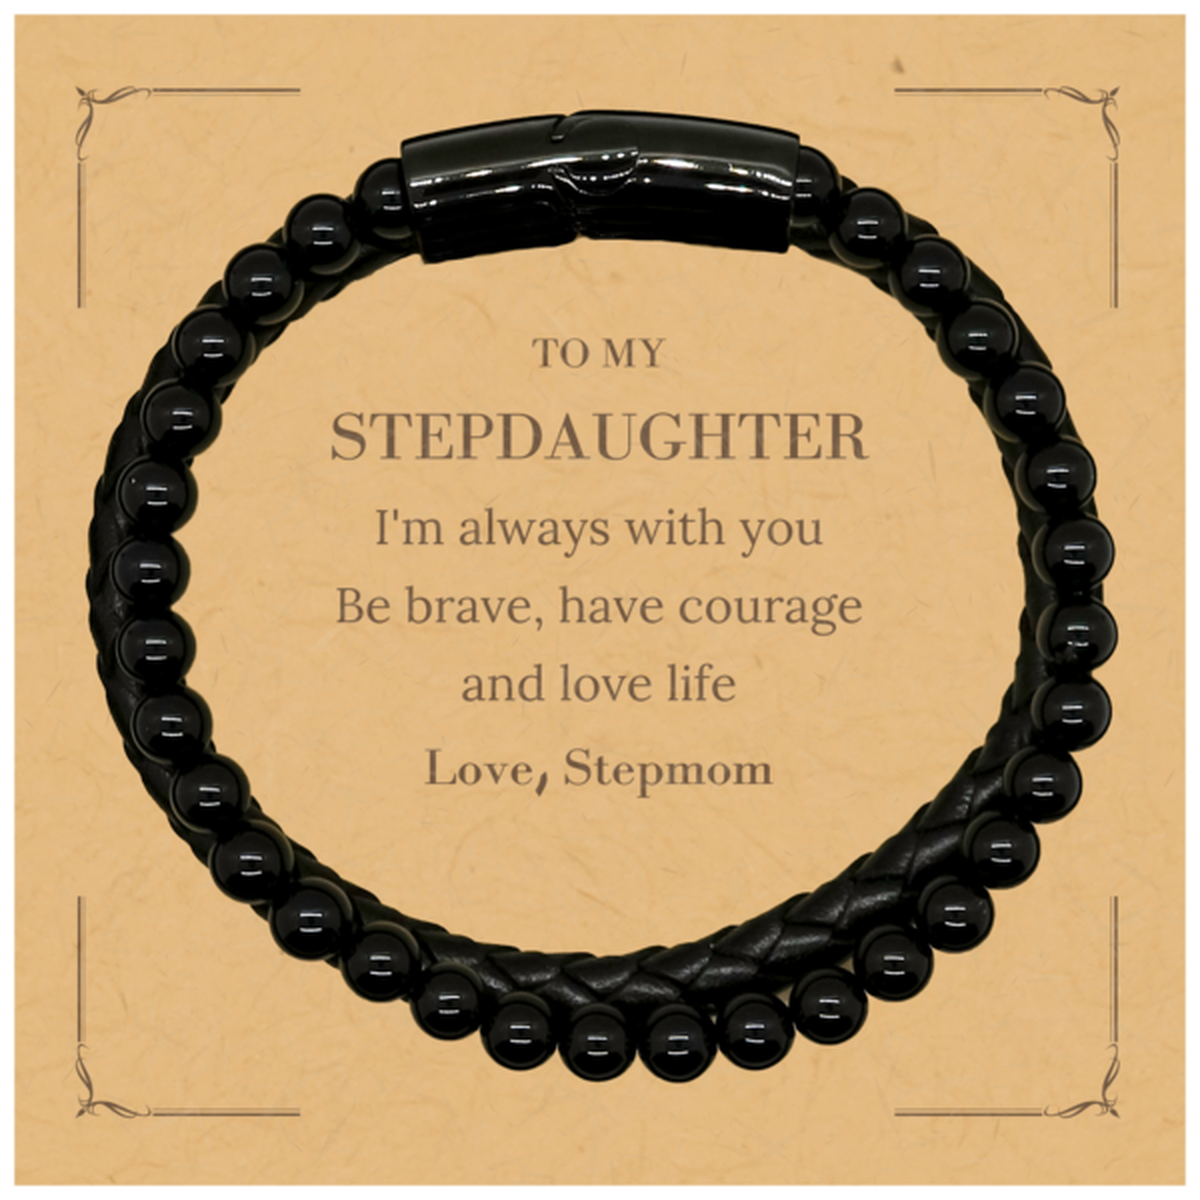 To My Stepdaughter Gifts from Stepmom, Unique Stone Leather Bracelets Inspirational Christmas Birthday Graduation Gifts for Stepdaughter I'm always with you. Be brave, have courage and love life. Love, Stepmom